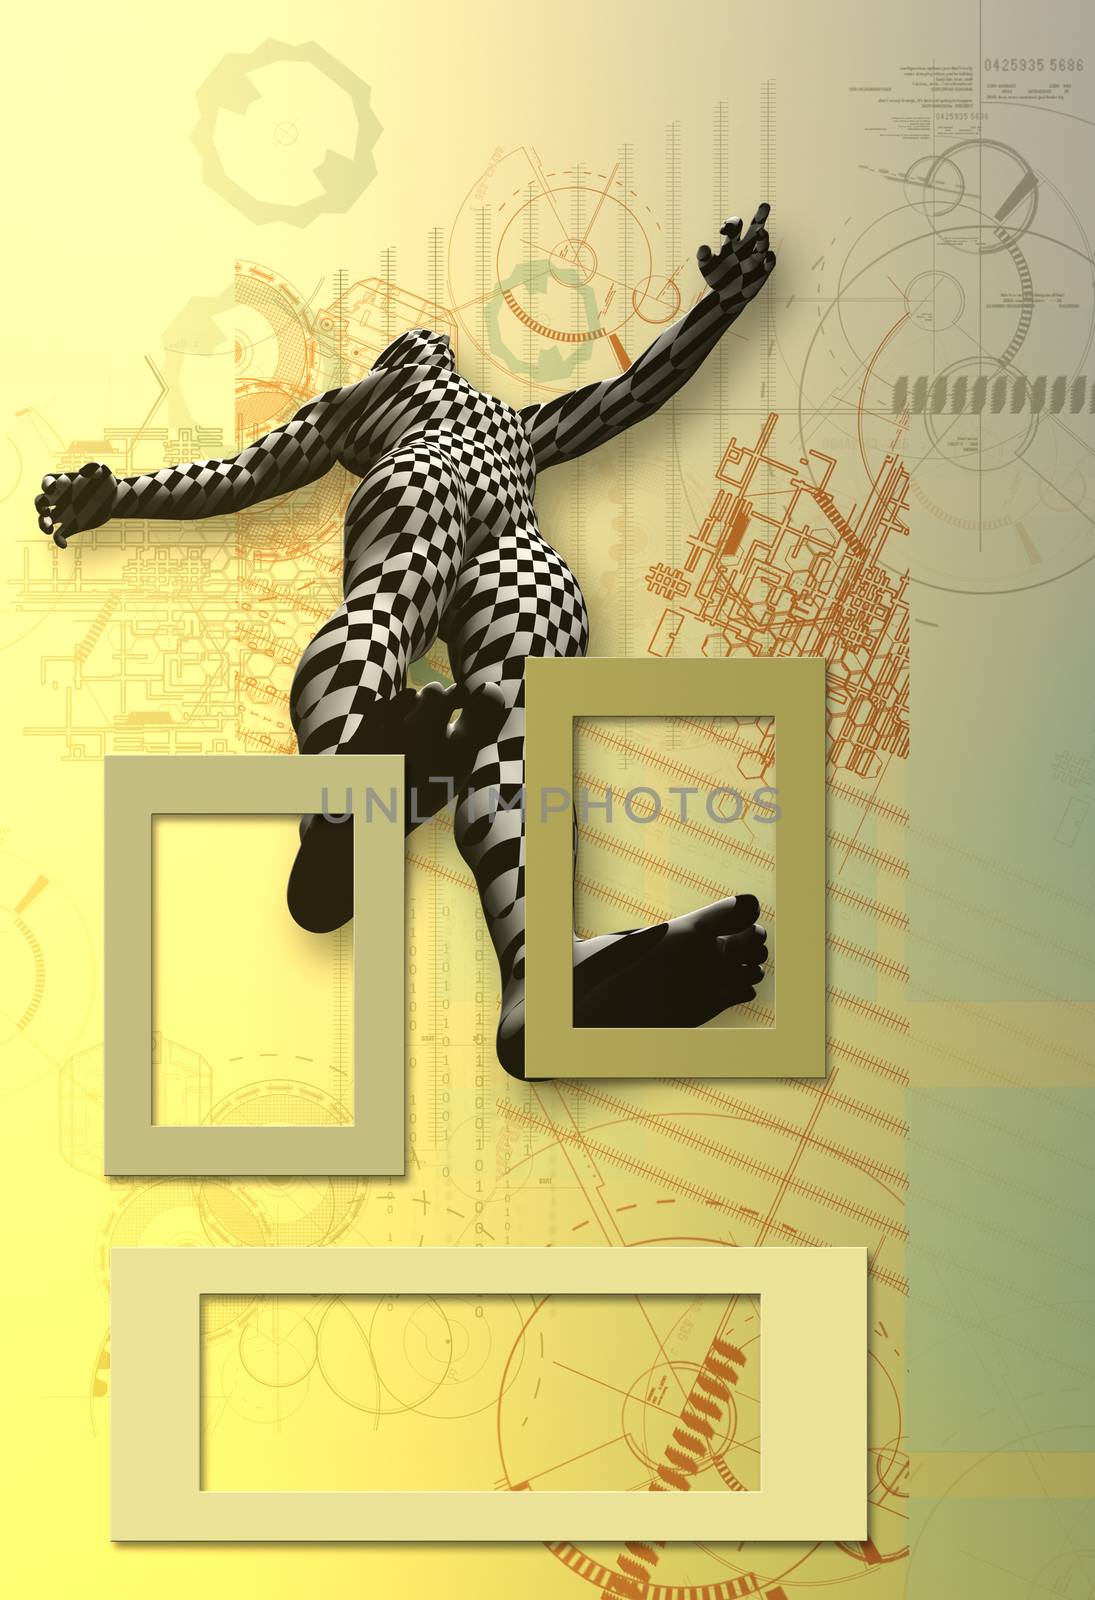 Checkered man on abstract drawing